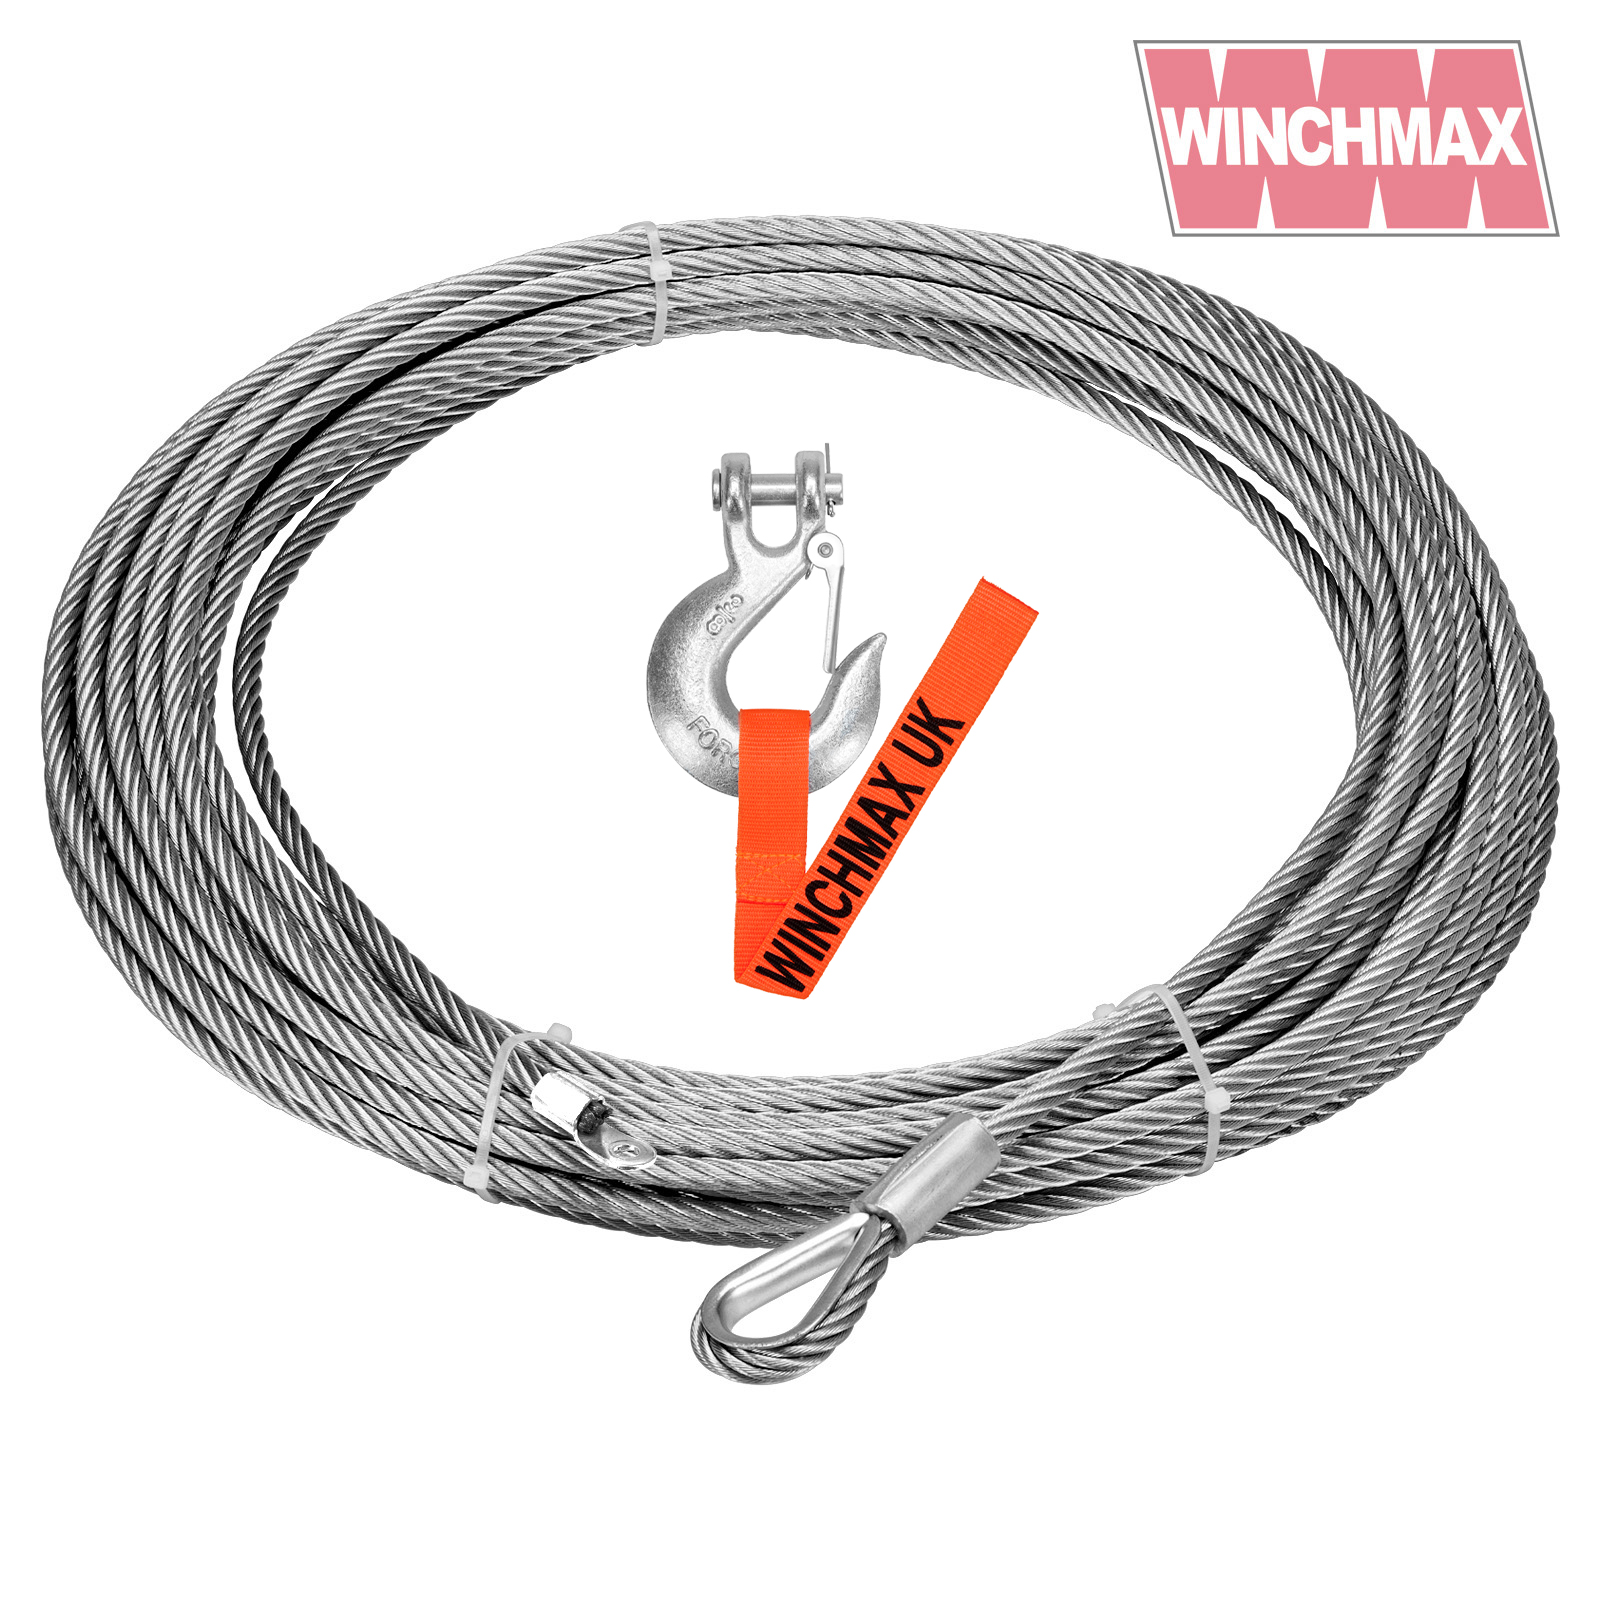 Winchmax 15x10 Wire Rope